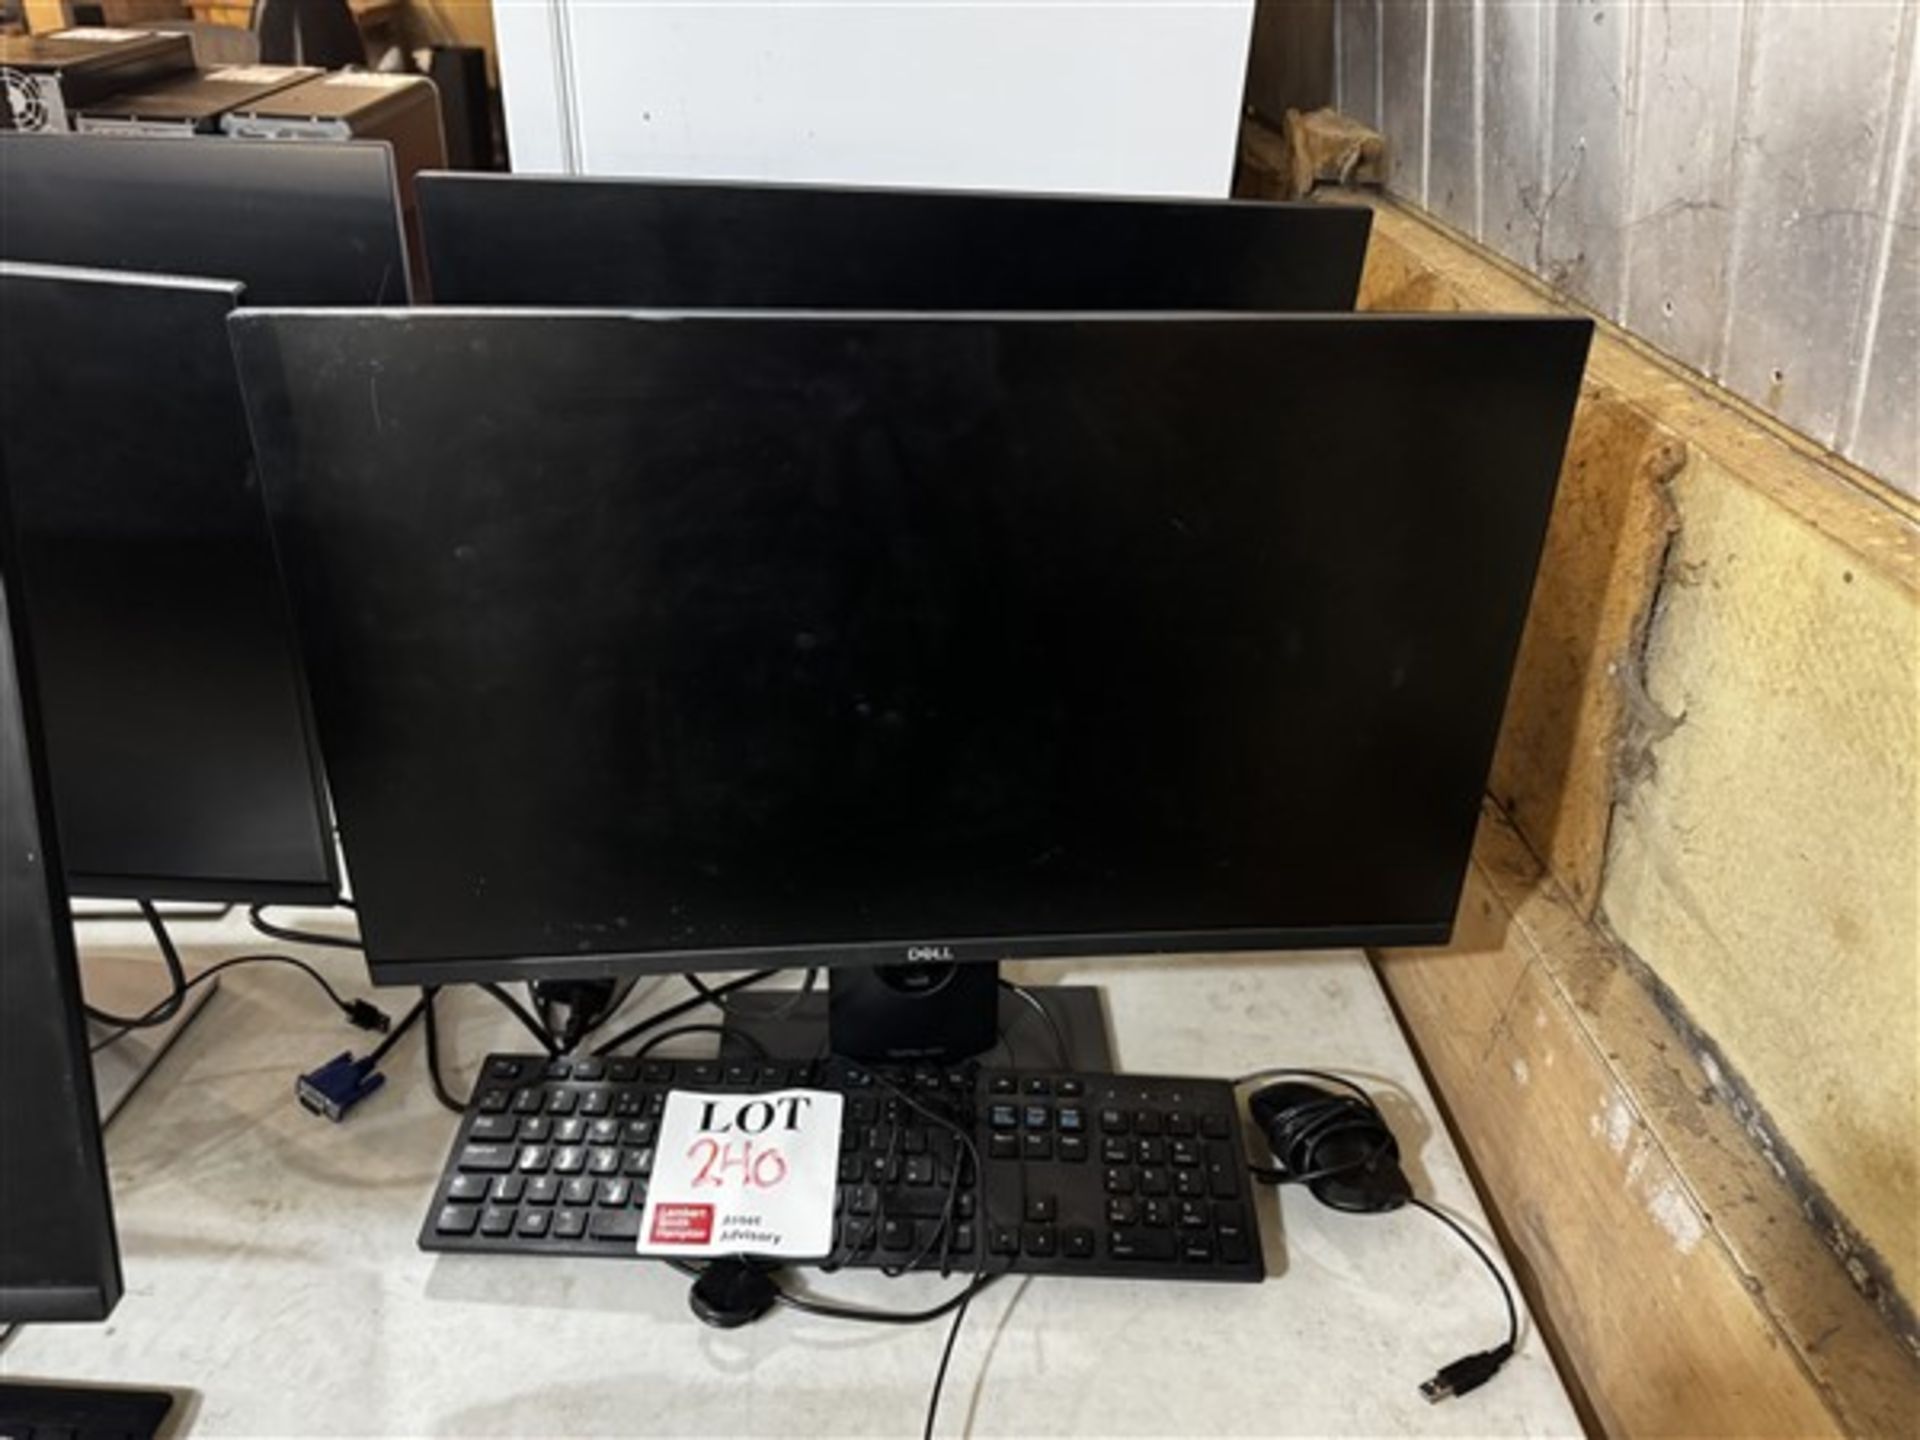 x2 Dell monitors with keyboard & mouse